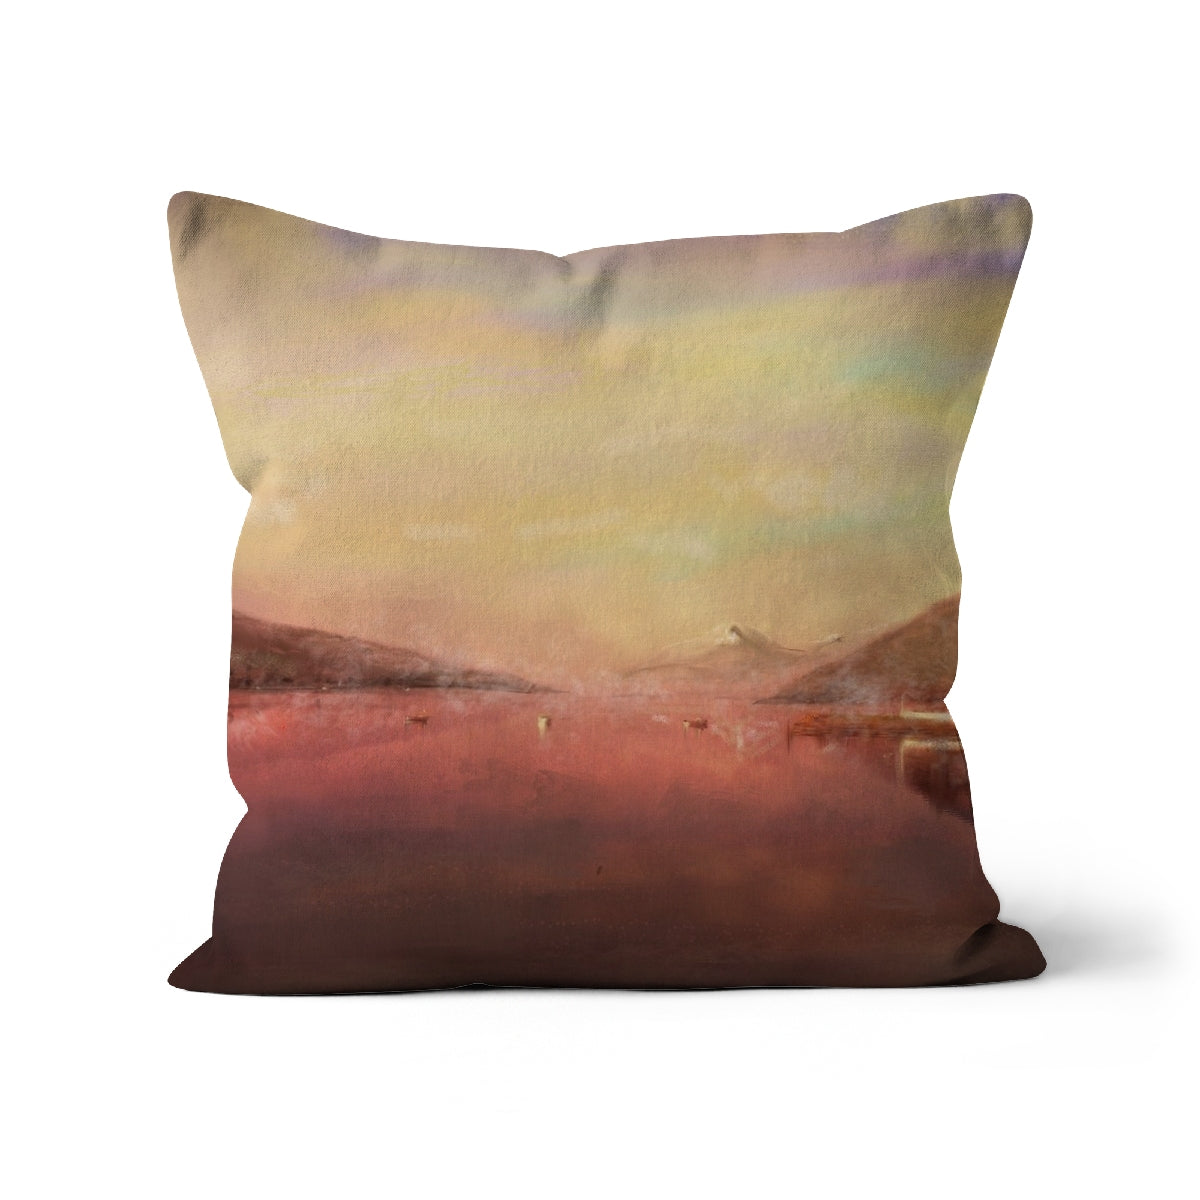 Loch Tay Art Gifts Cushion-Cushions-Scottish Lochs & Mountains Art Gallery-Linen-12"x12"-Paintings, Prints, Homeware, Art Gifts From Scotland By Scottish Artist Kevin Hunter